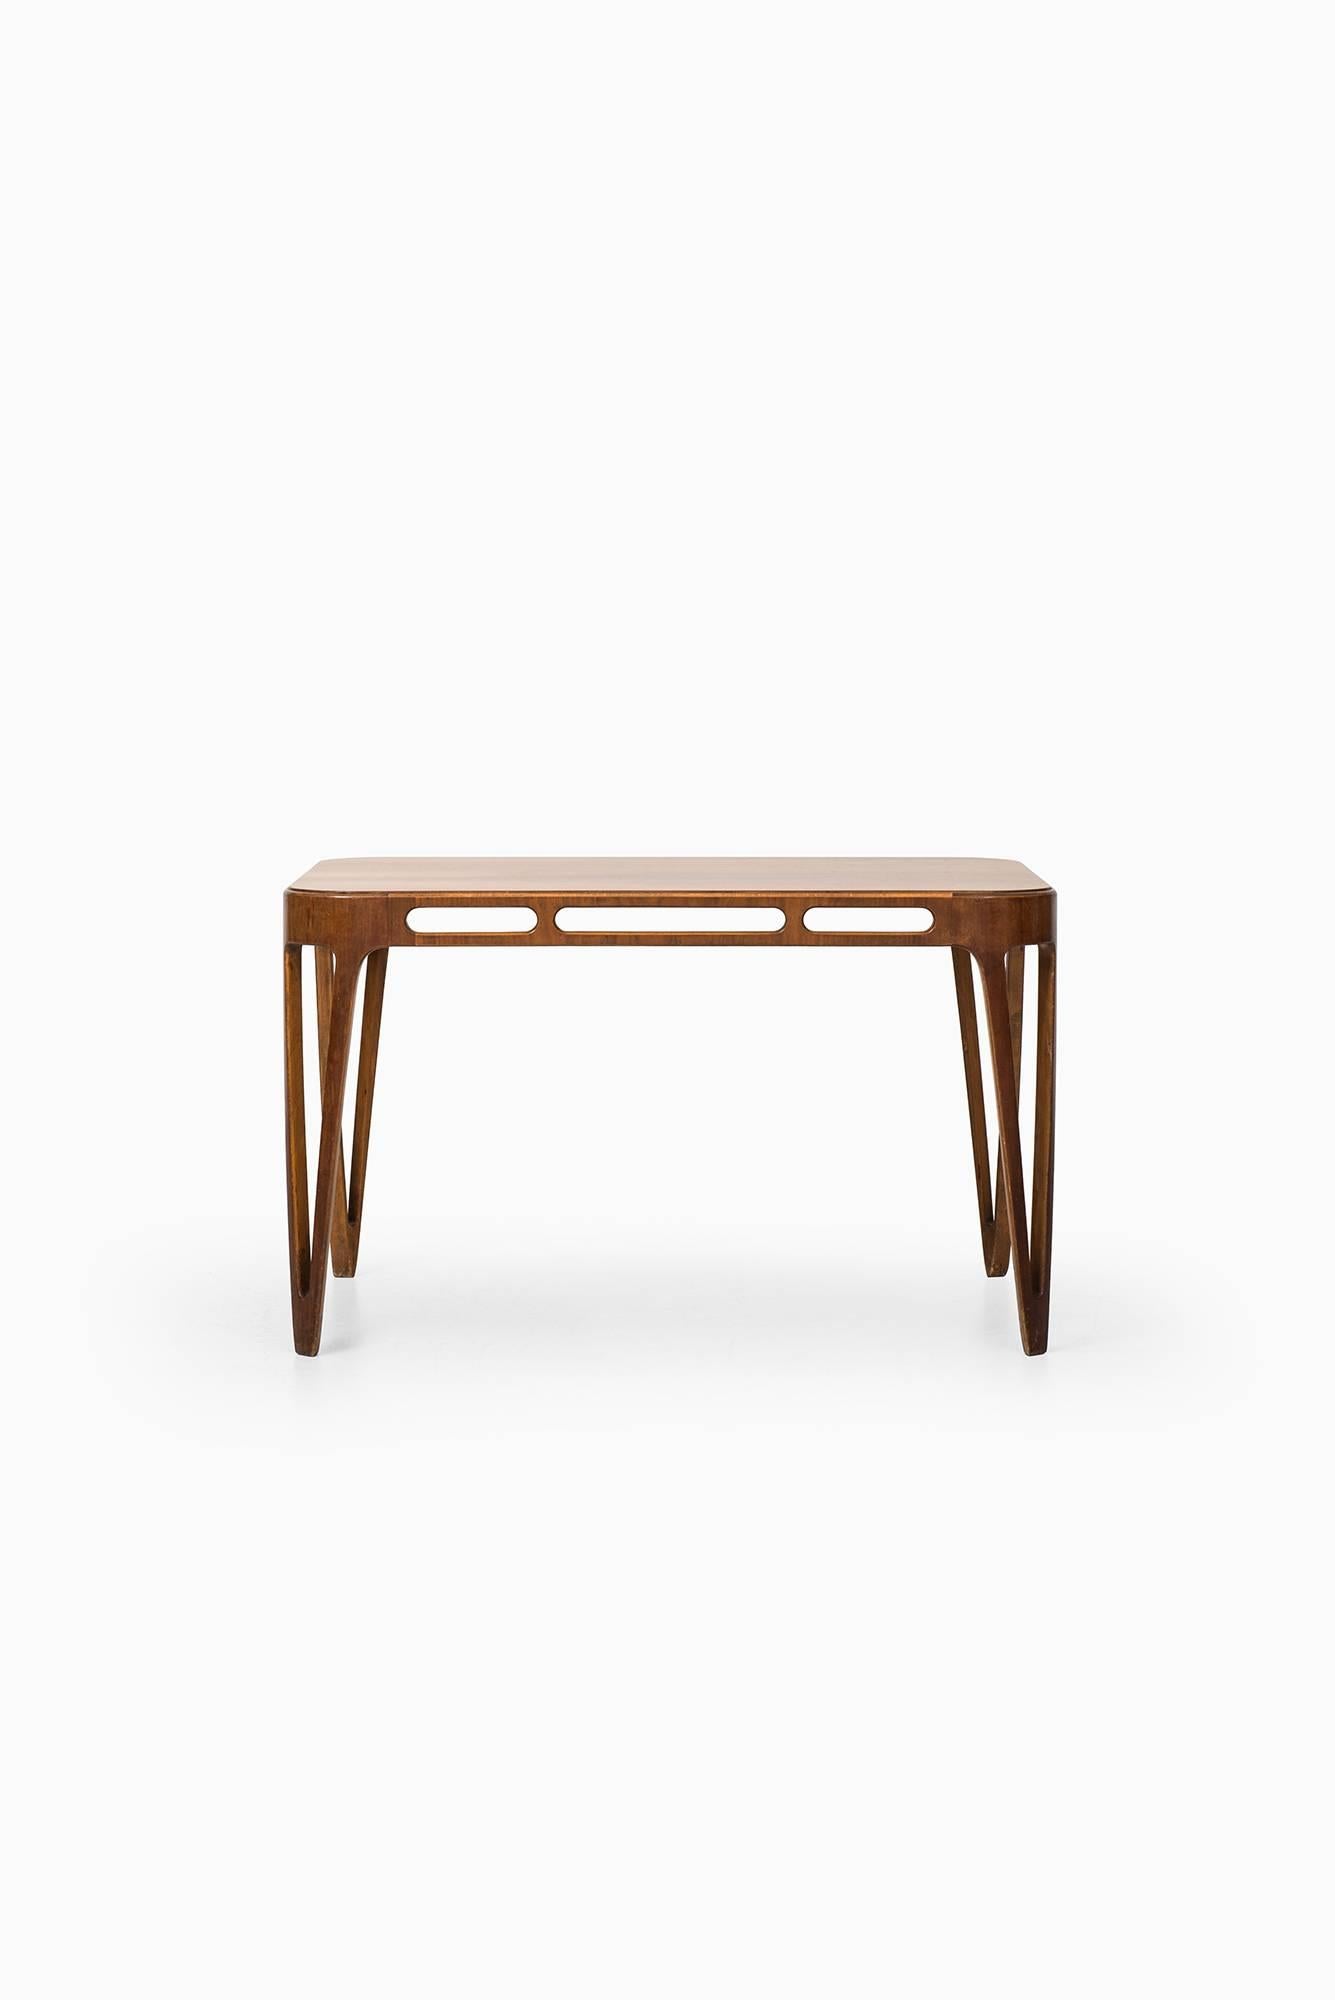 Scandinavian Modern Carl-Axel Acking Side or Console Table by Bodafors in Sweden